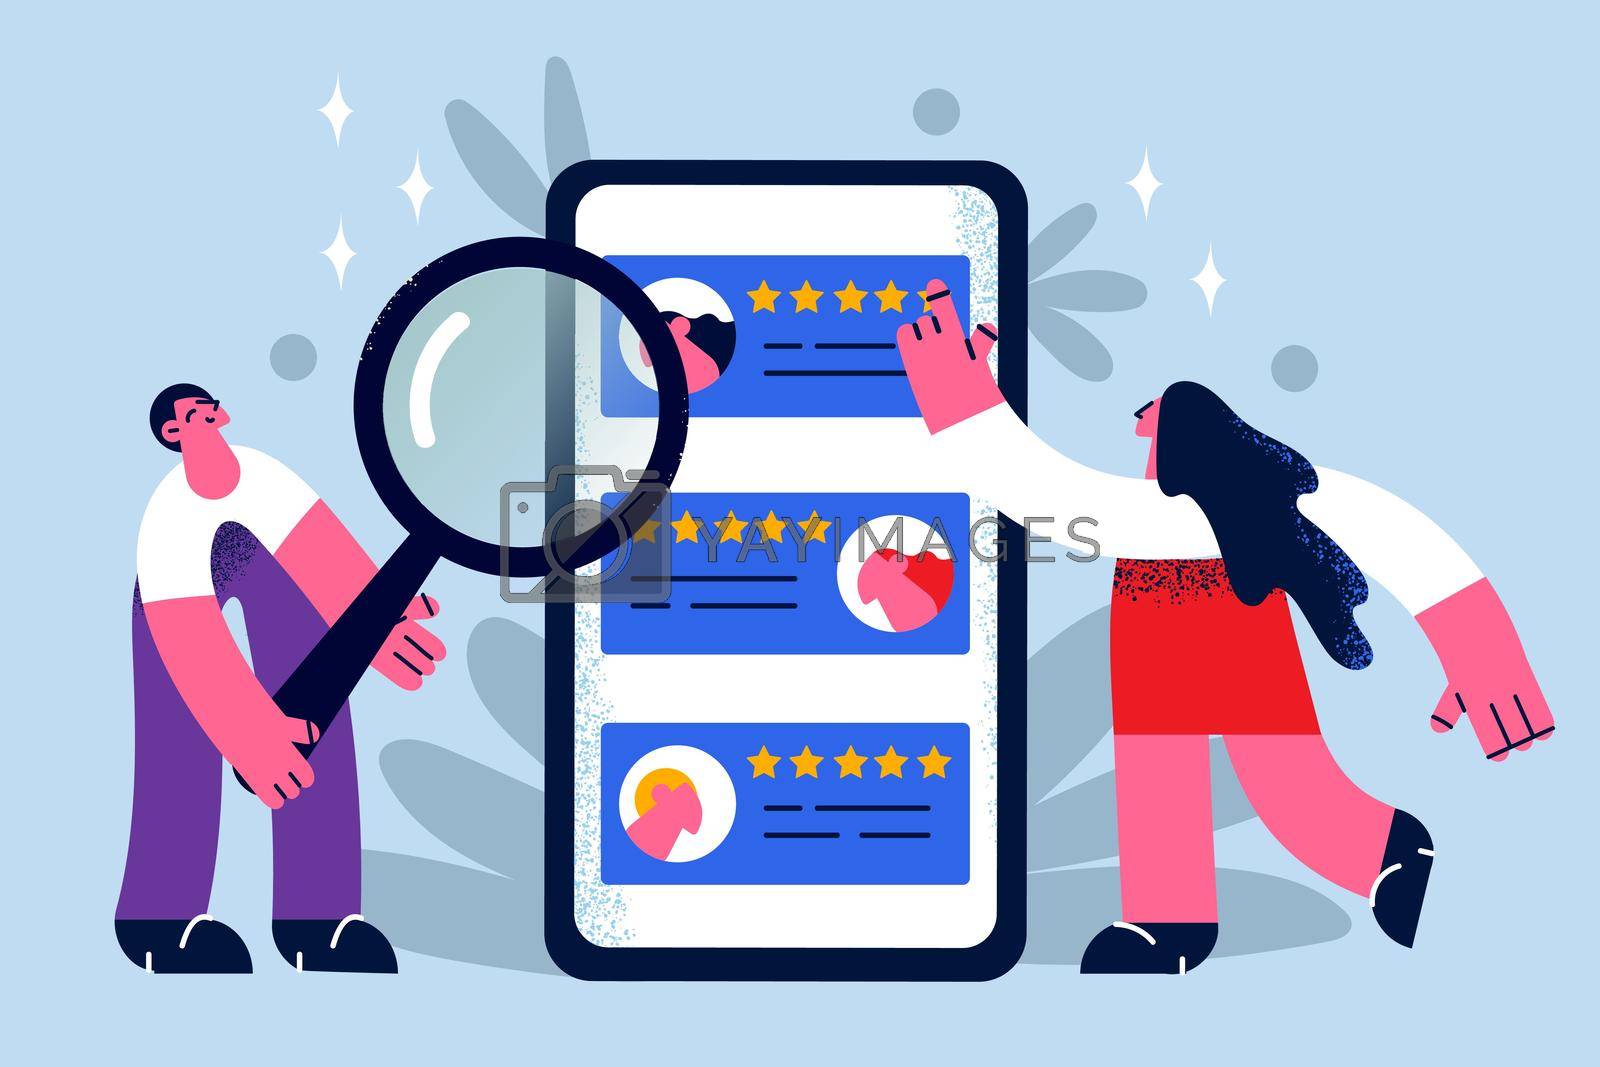 Human resources and online hunting concept. Young woman and man managers hunters standing with magnifier looking at workers ratings choosing vector illustration